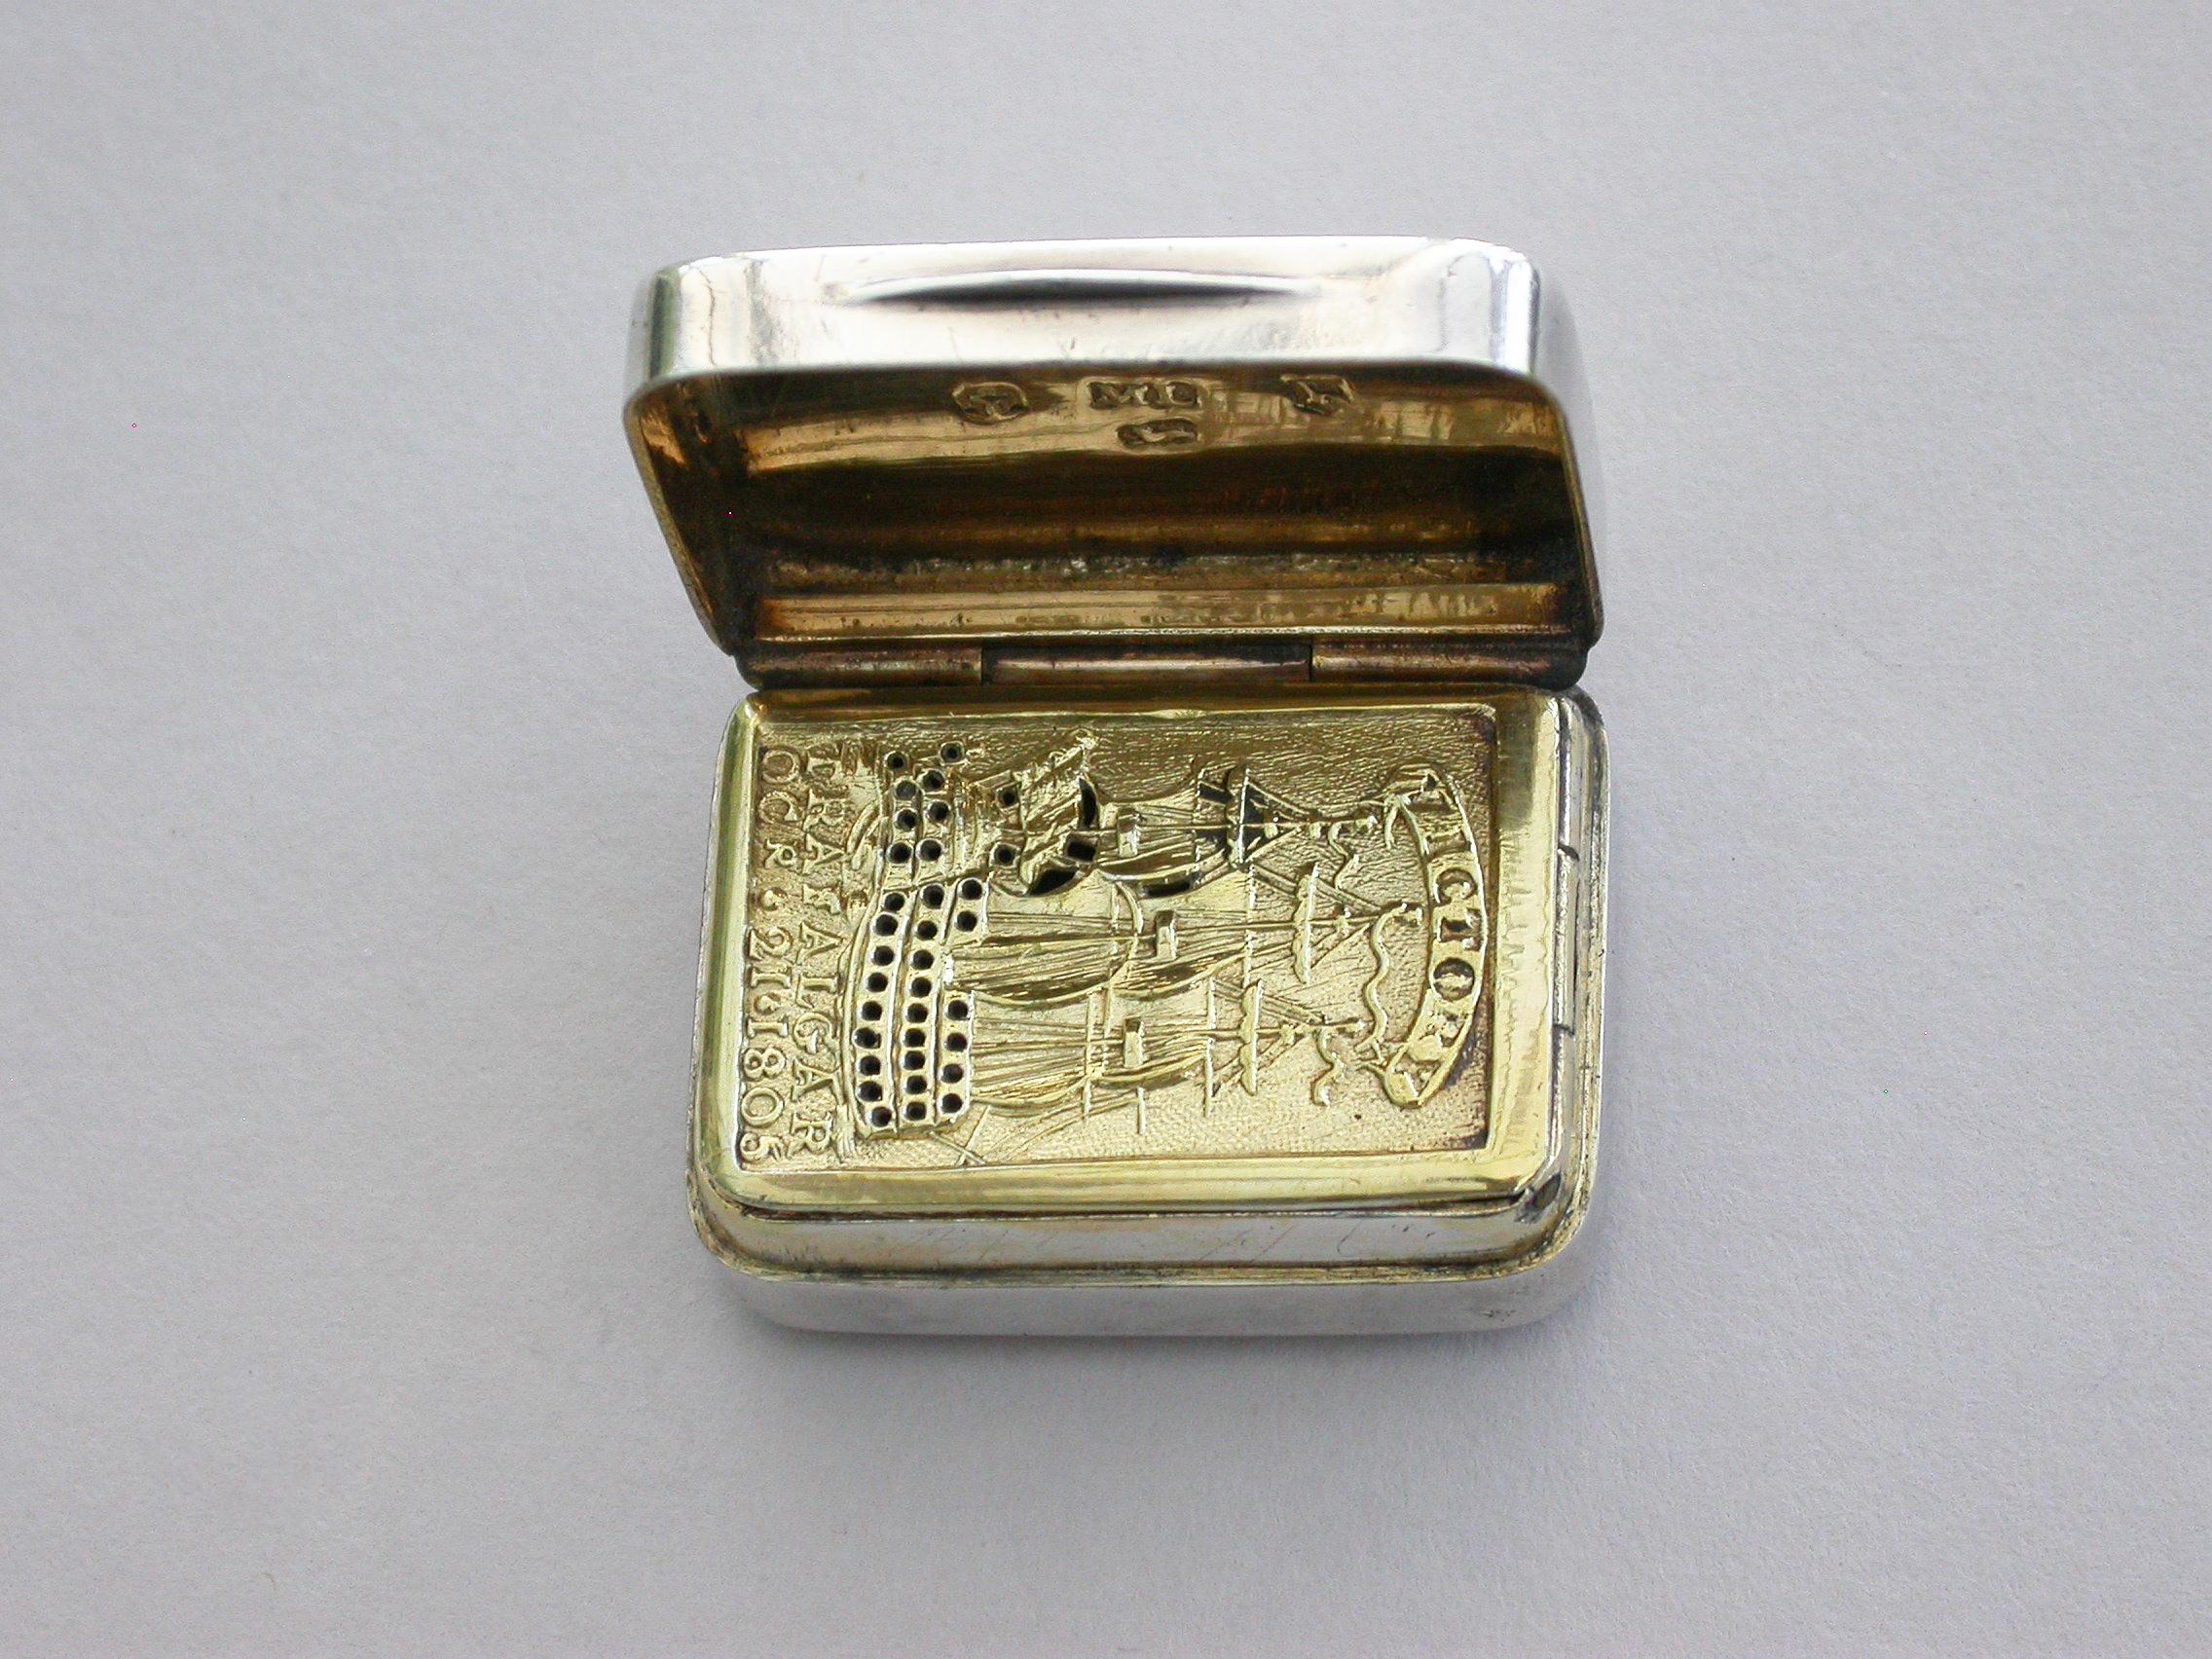 An extremely rare George III commemorative silver Vinaigrette of plain rounded rectangular form with raised thumb-piece, the lid engraved with script initials, 'CC' (possibly for Lord Cuthbert Collingwood). The silver gilt die-stamped vertical